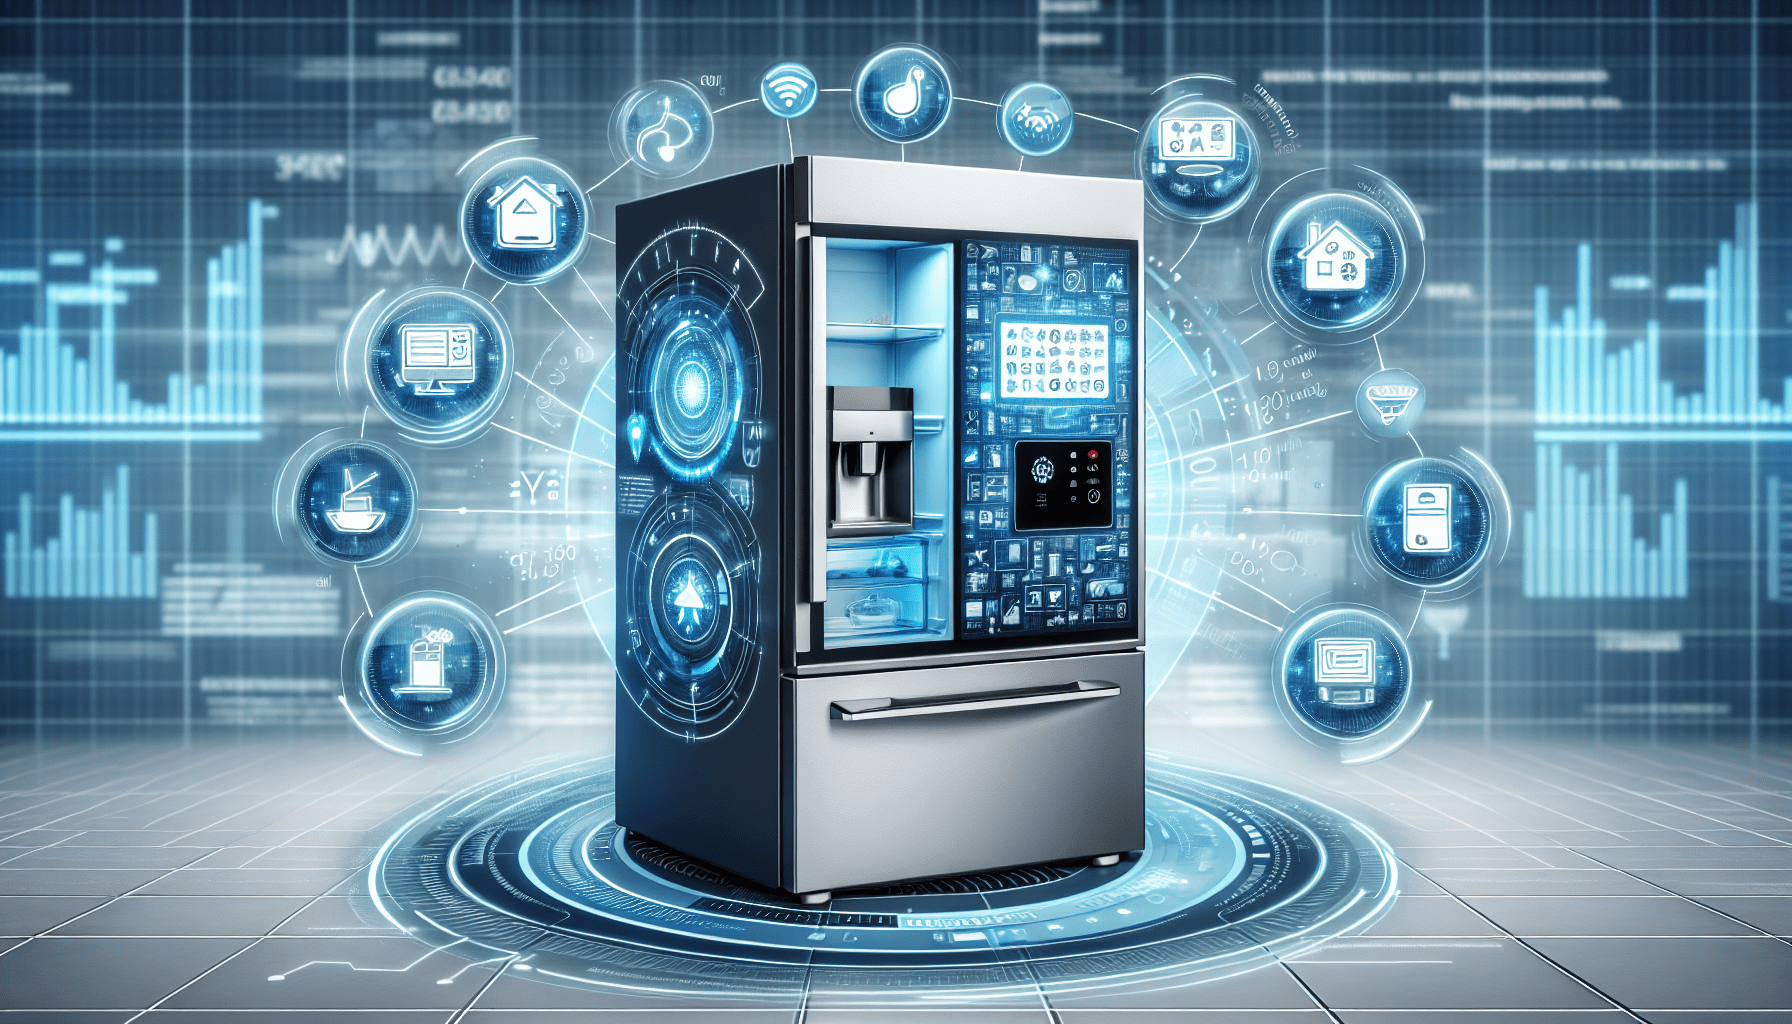 What Is The Principle Of Smart Appliances?